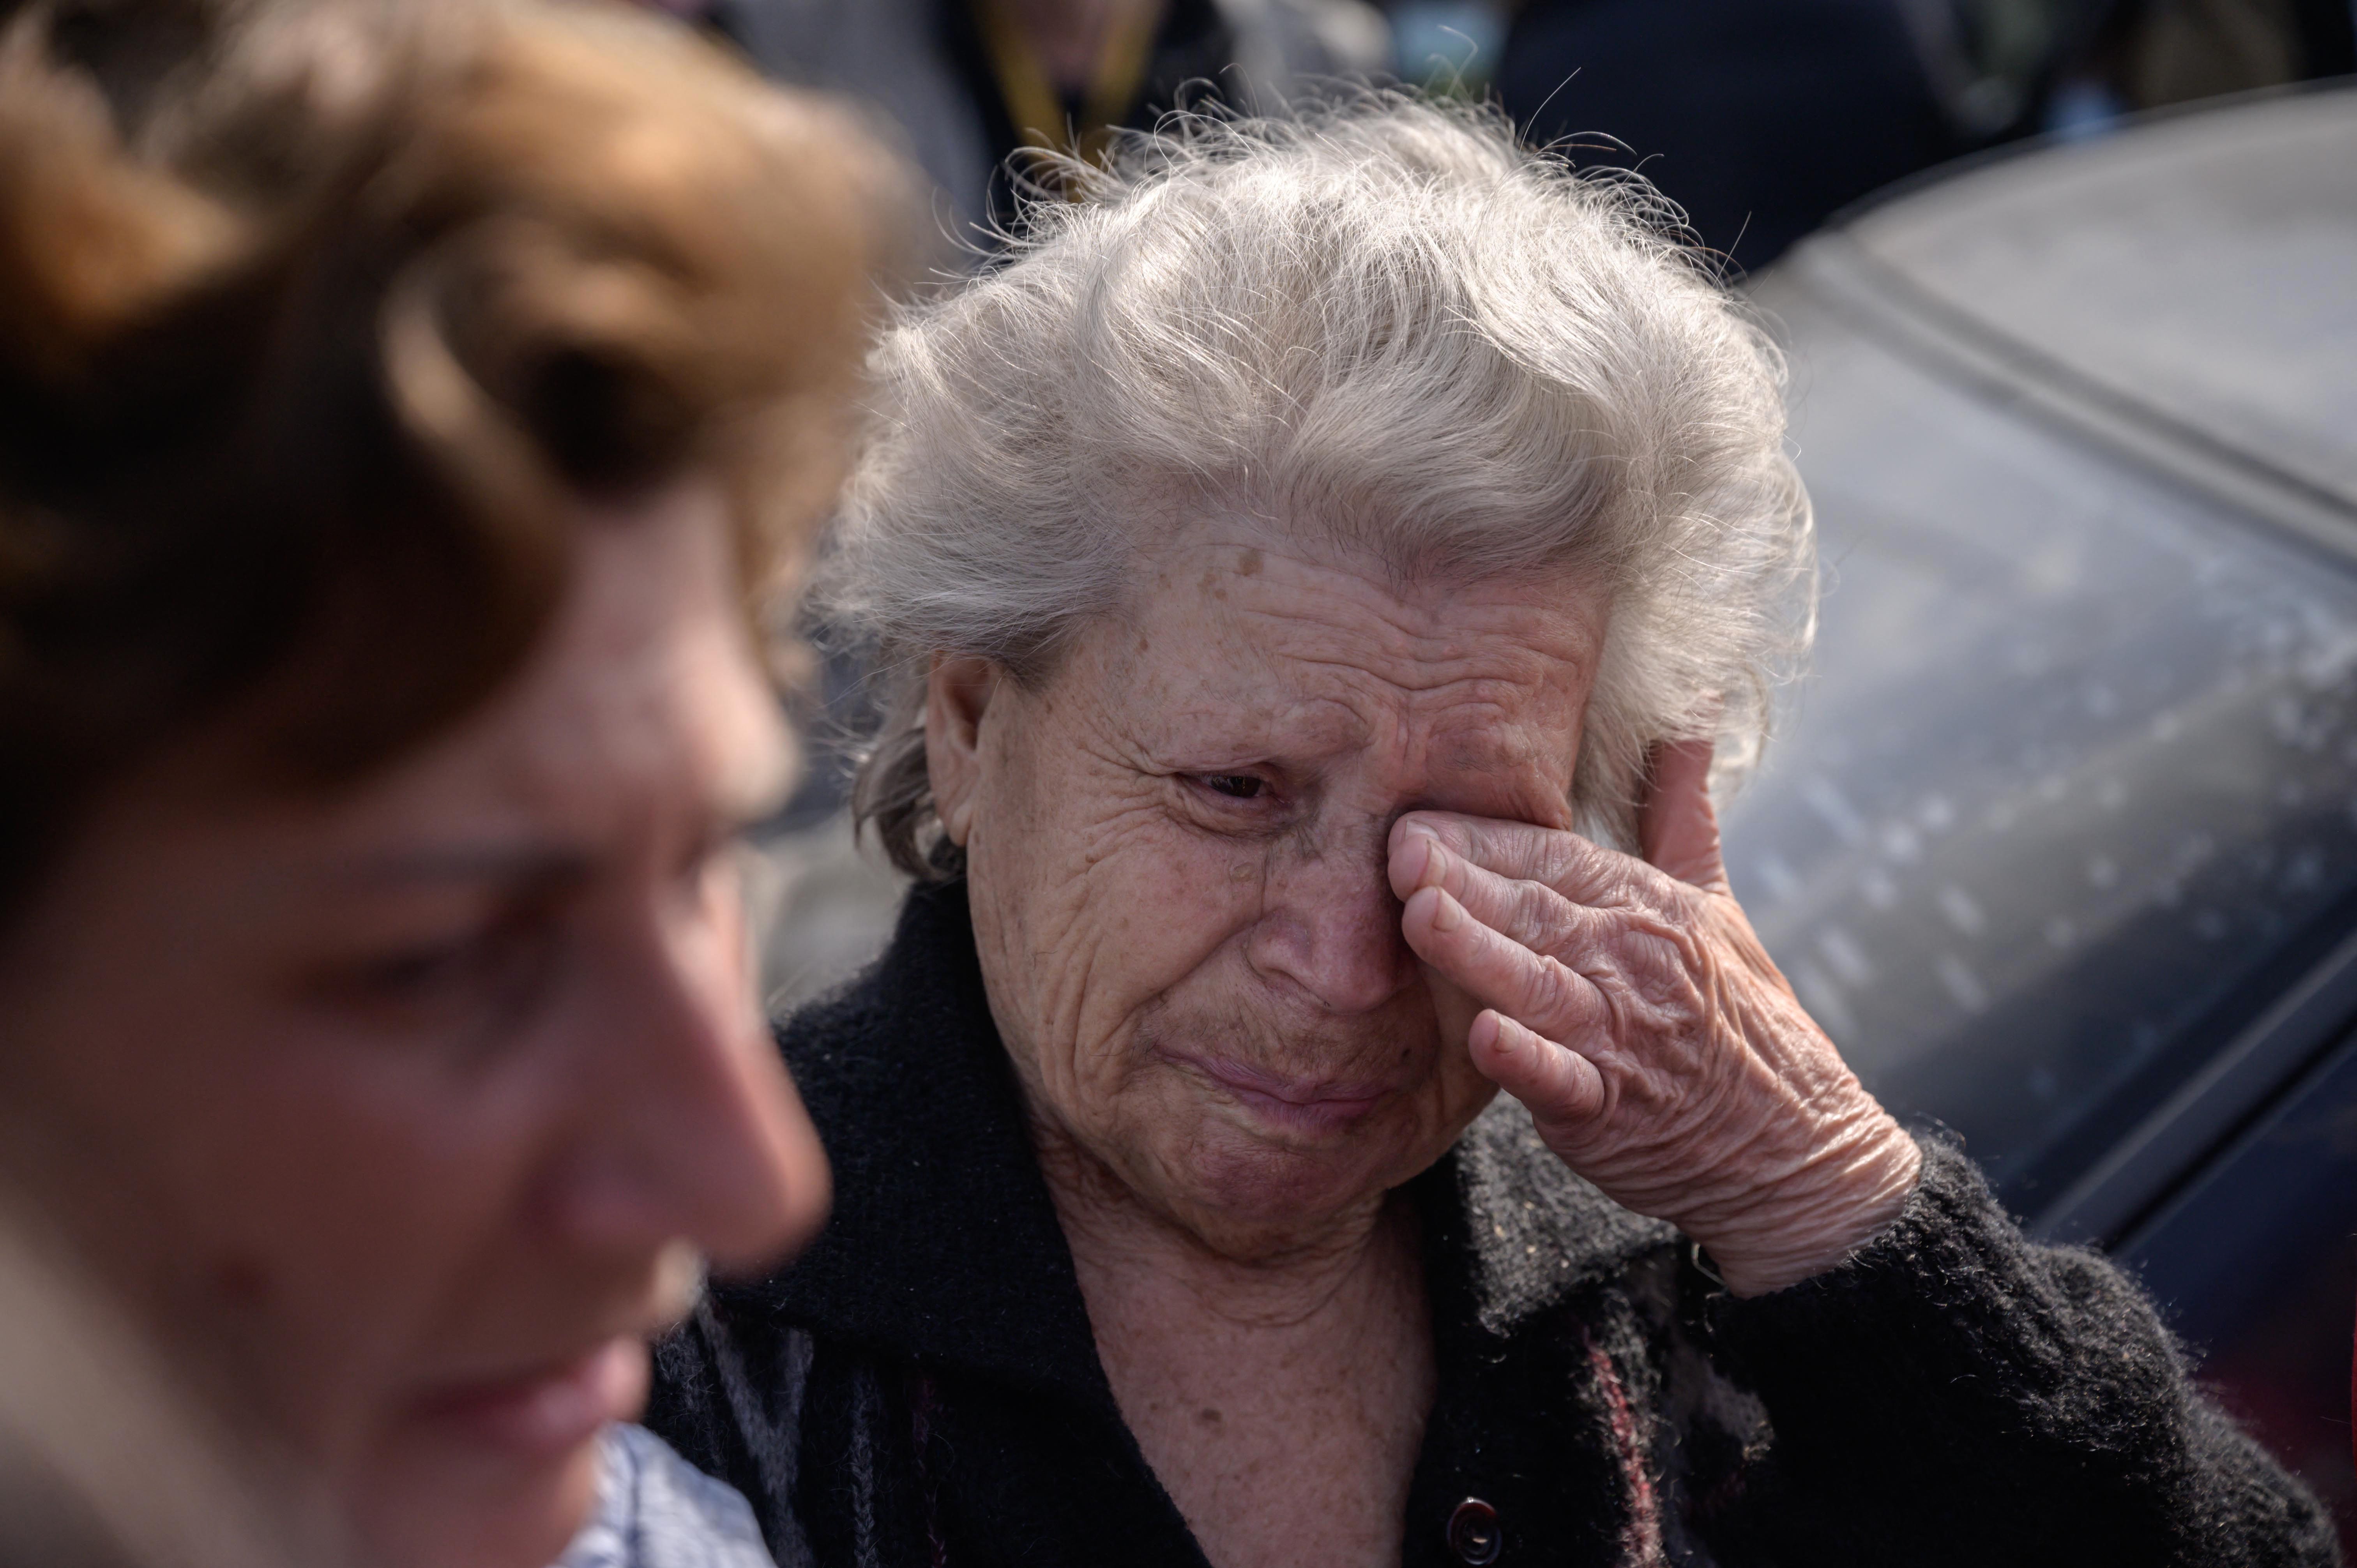 Mother and daughter Dina, right, and Natasha, left, from Mariupol, arrived in their own vehicle separate from a larger convoy expected later, at a registration and processing area for internally displaced people arriving from Russian-occupied territories in Ukraine, in Zaporizhzhia, on May 2.